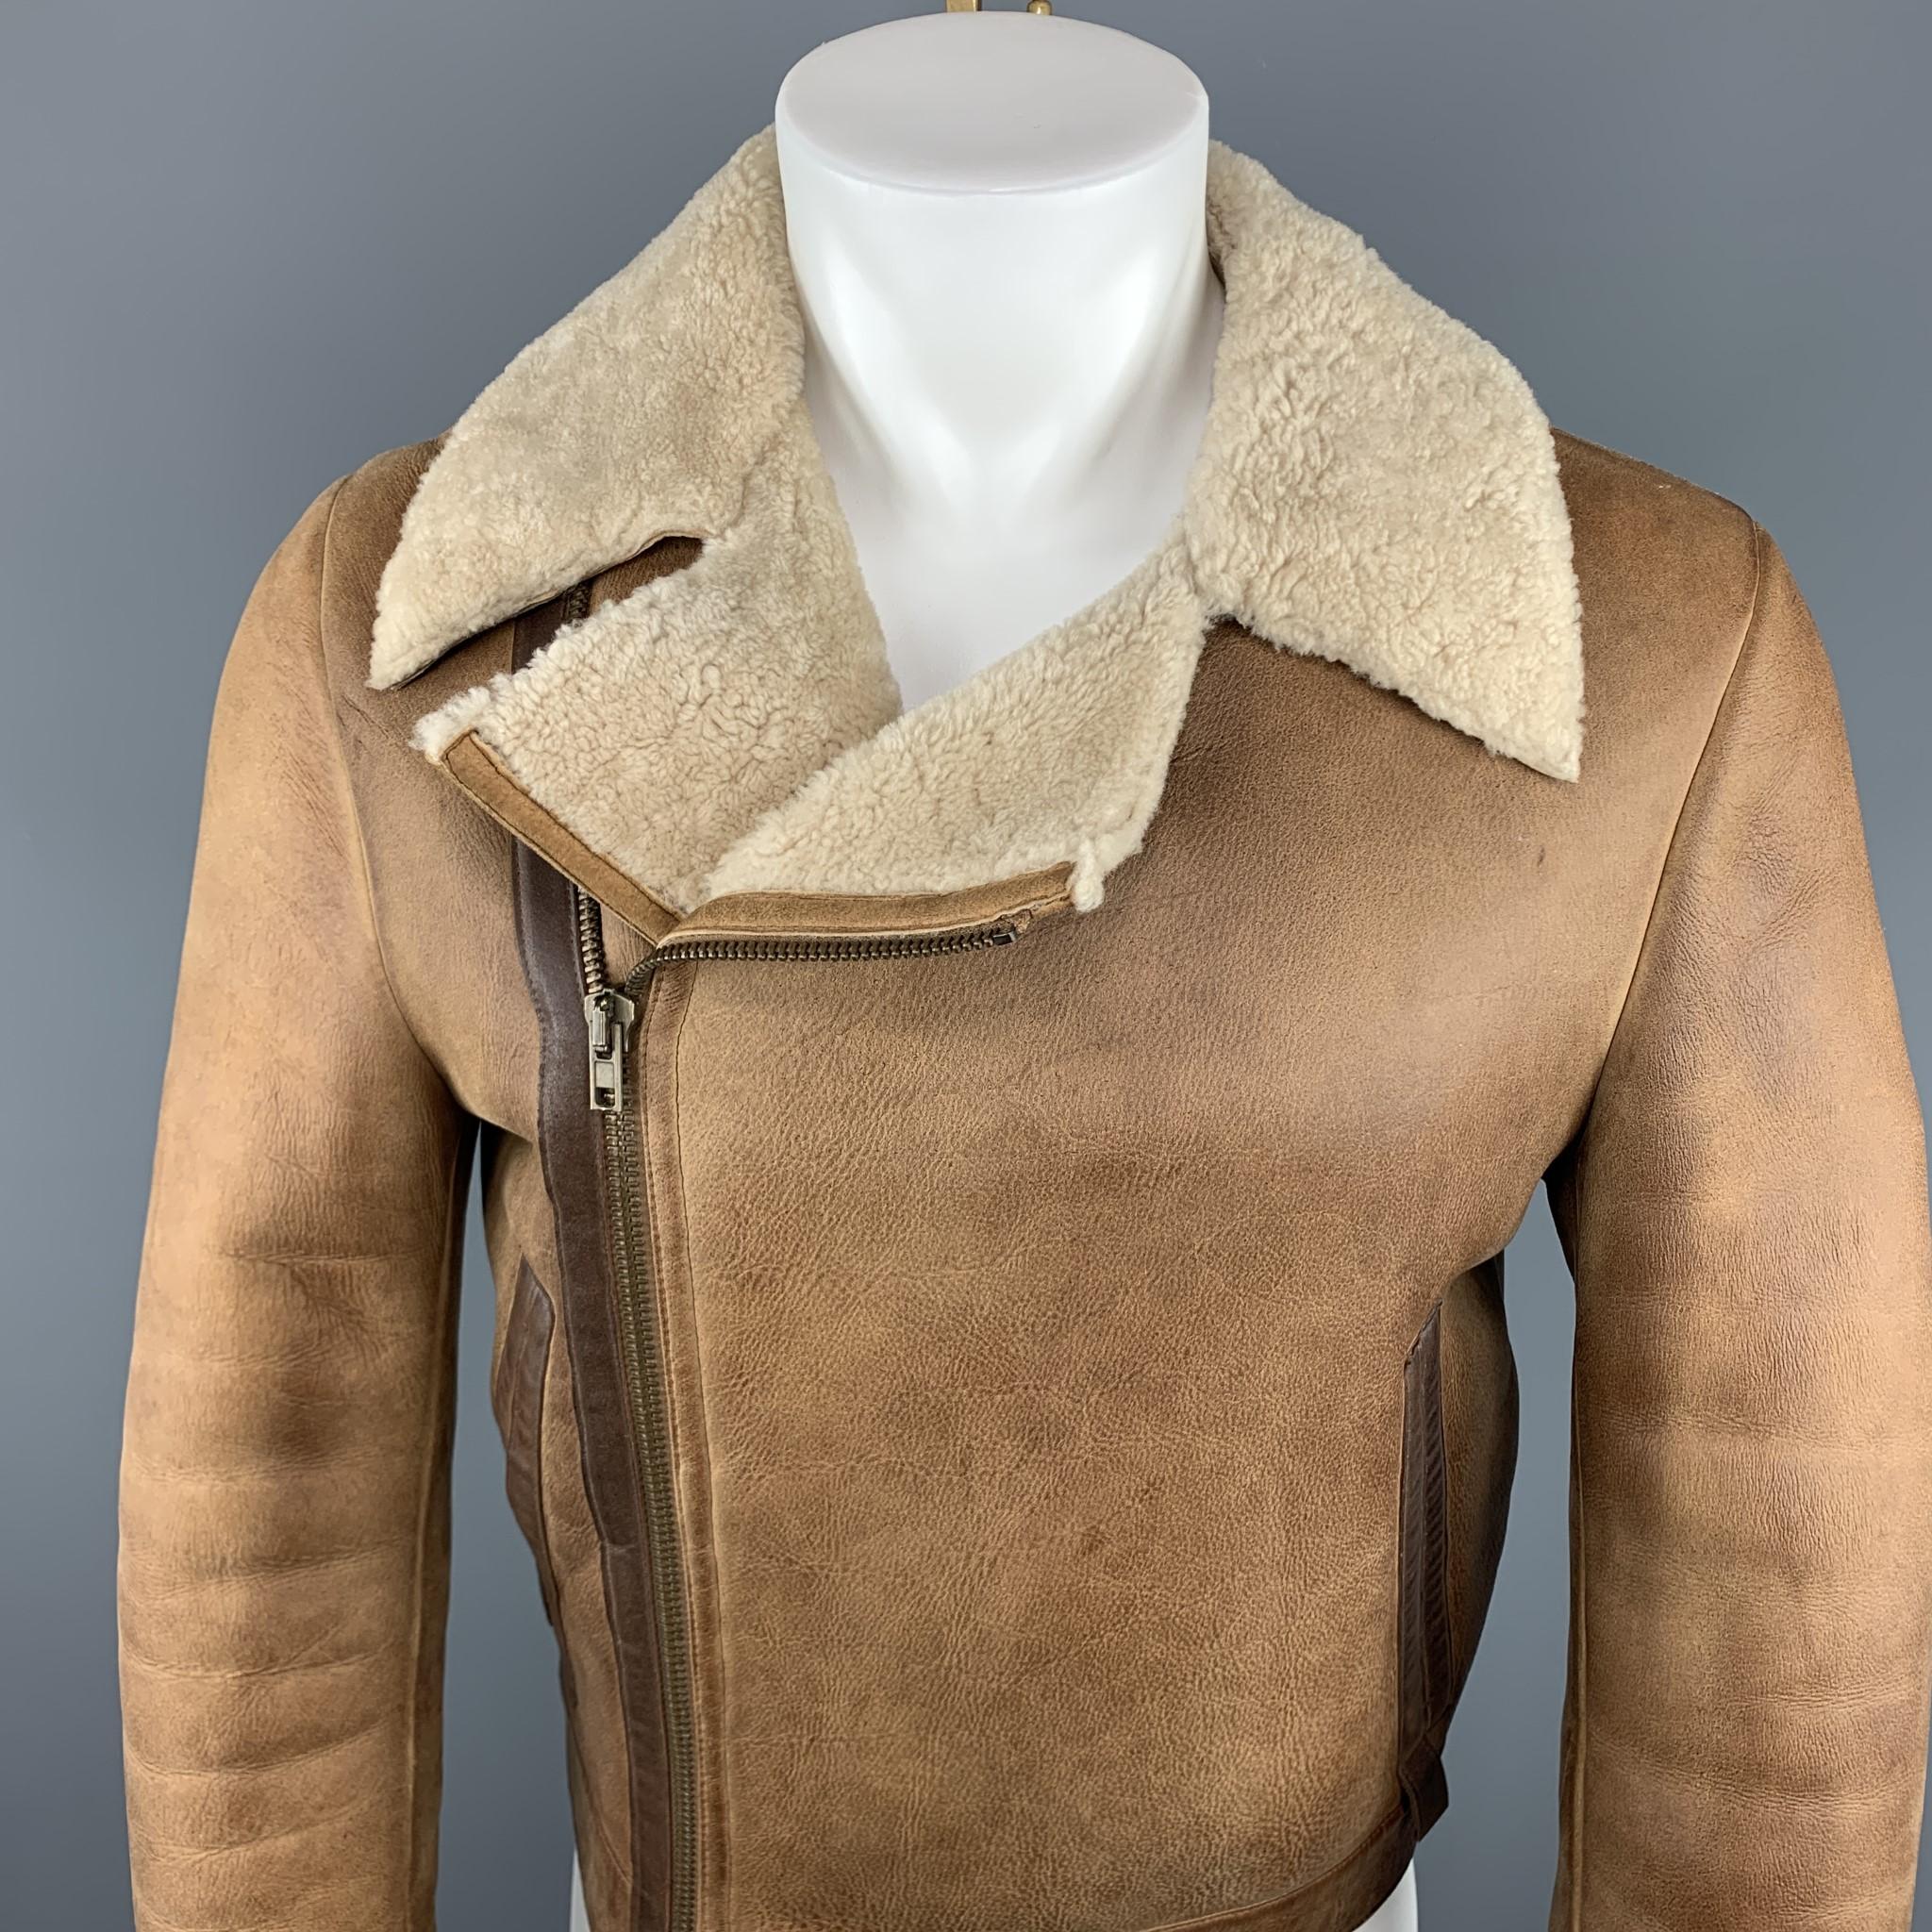 Vintage MIU MIU Jacket comes in a tan distressed shearling featuring a biker style, brown trim, and a full zip closure. Made in Italy.

Very Good Pre-Owned Condition.
Marked: 46

Measurements:

Shoulder: 18 in.
Chest: 36 in.
Sleeve: 26 in.
Length: